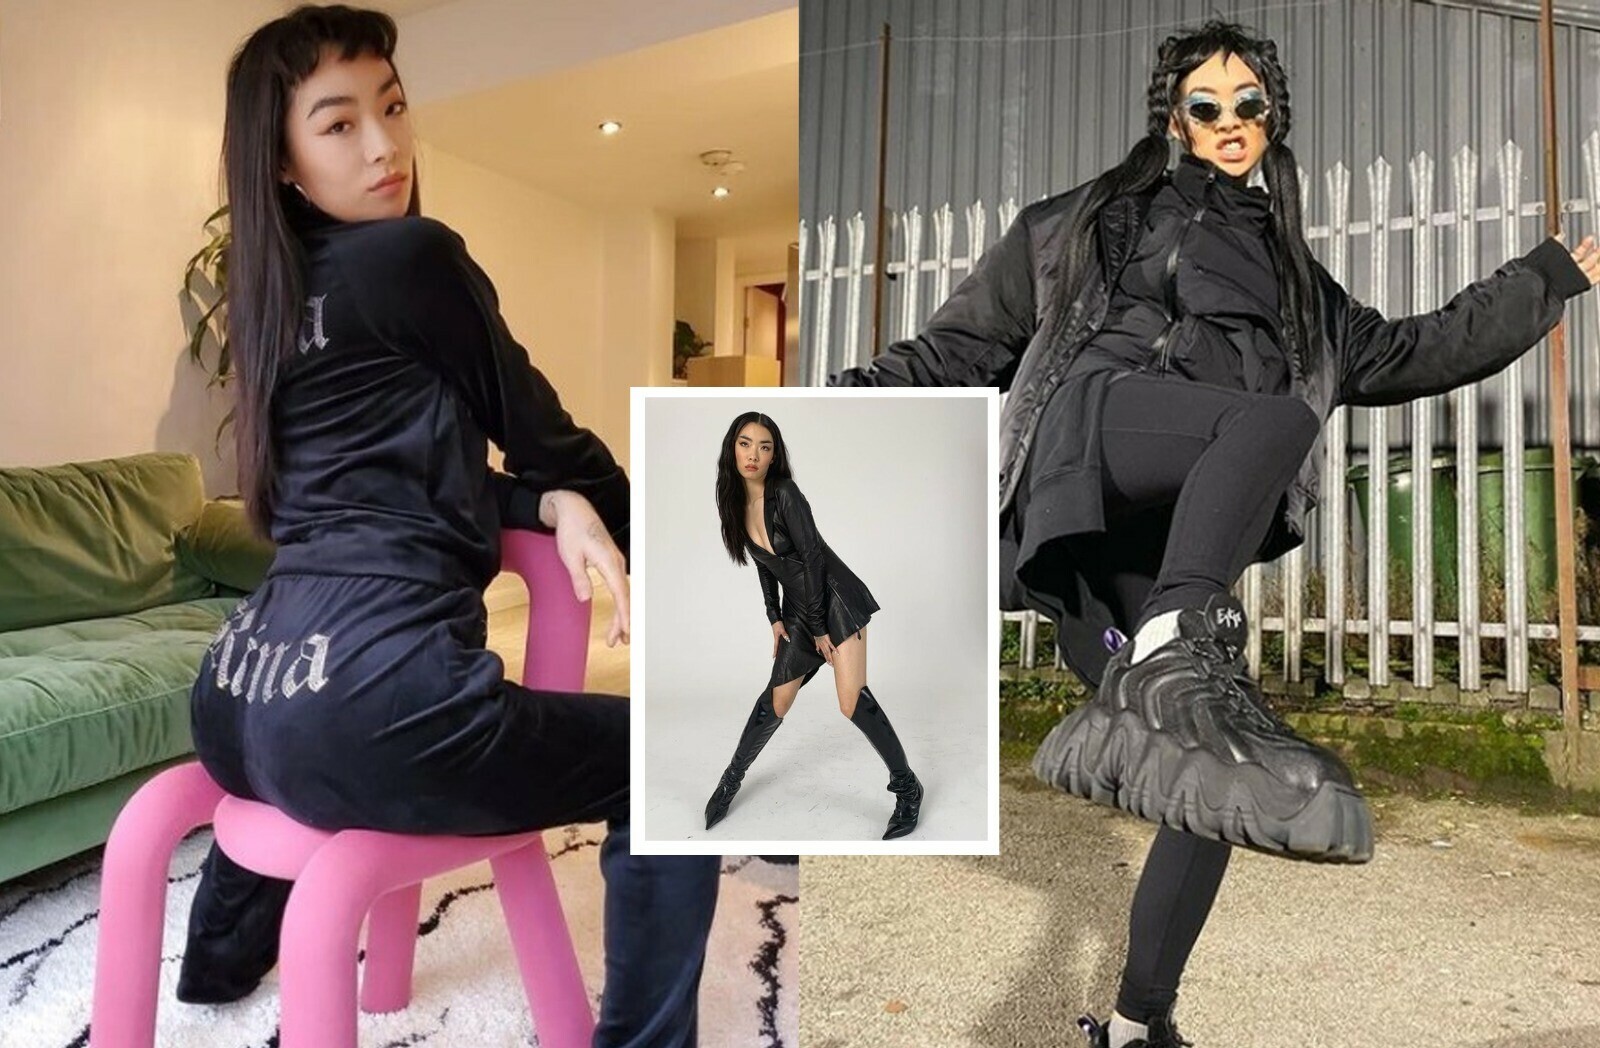 Get Rina Sawayama's Look: Our From The Singer - Voir Fashion